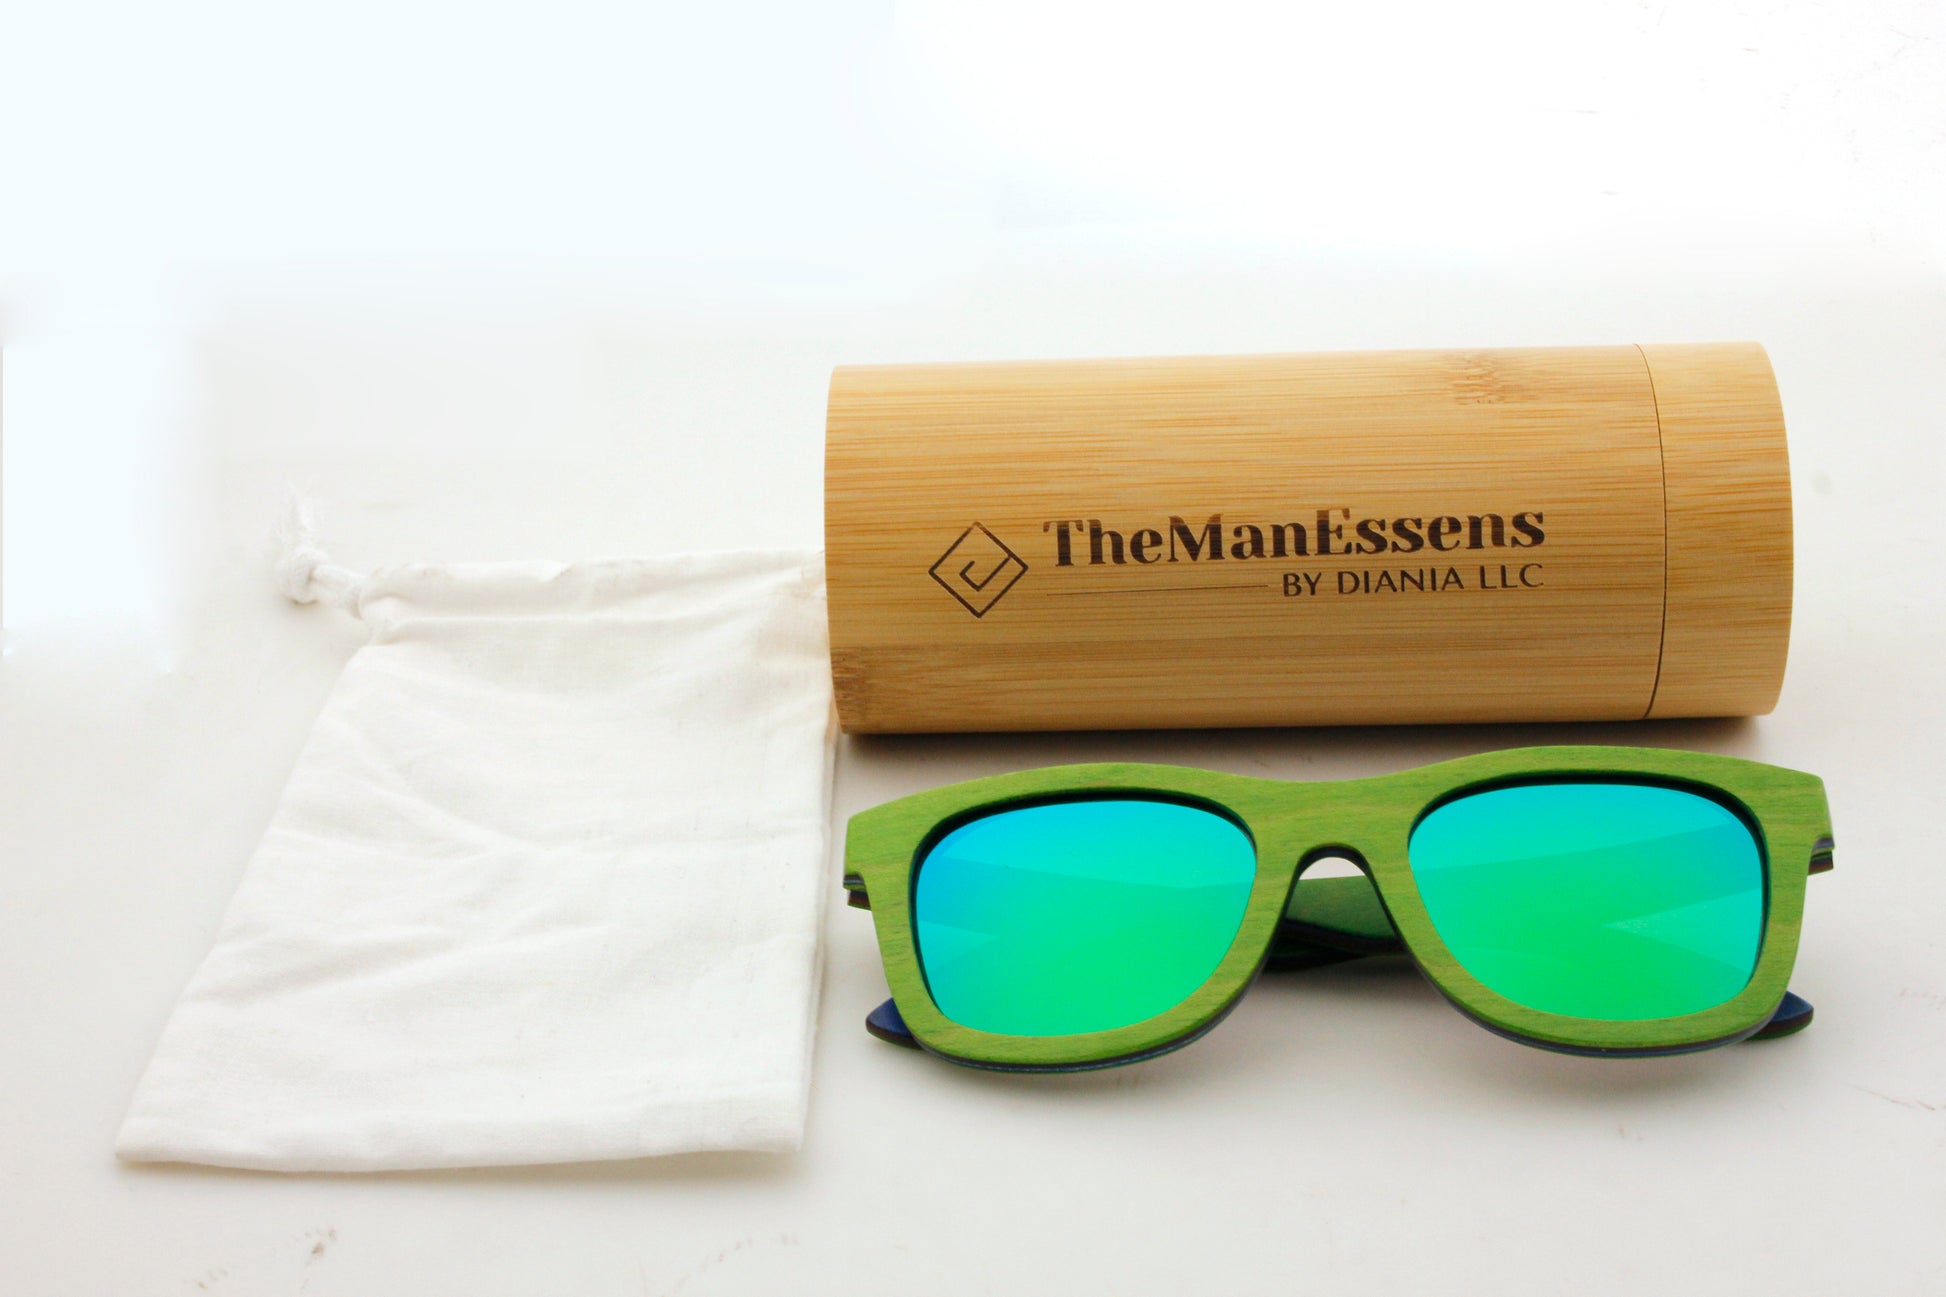 Quarter bamboo wood sunglasses next to cotton bag in front of bamboo tube case